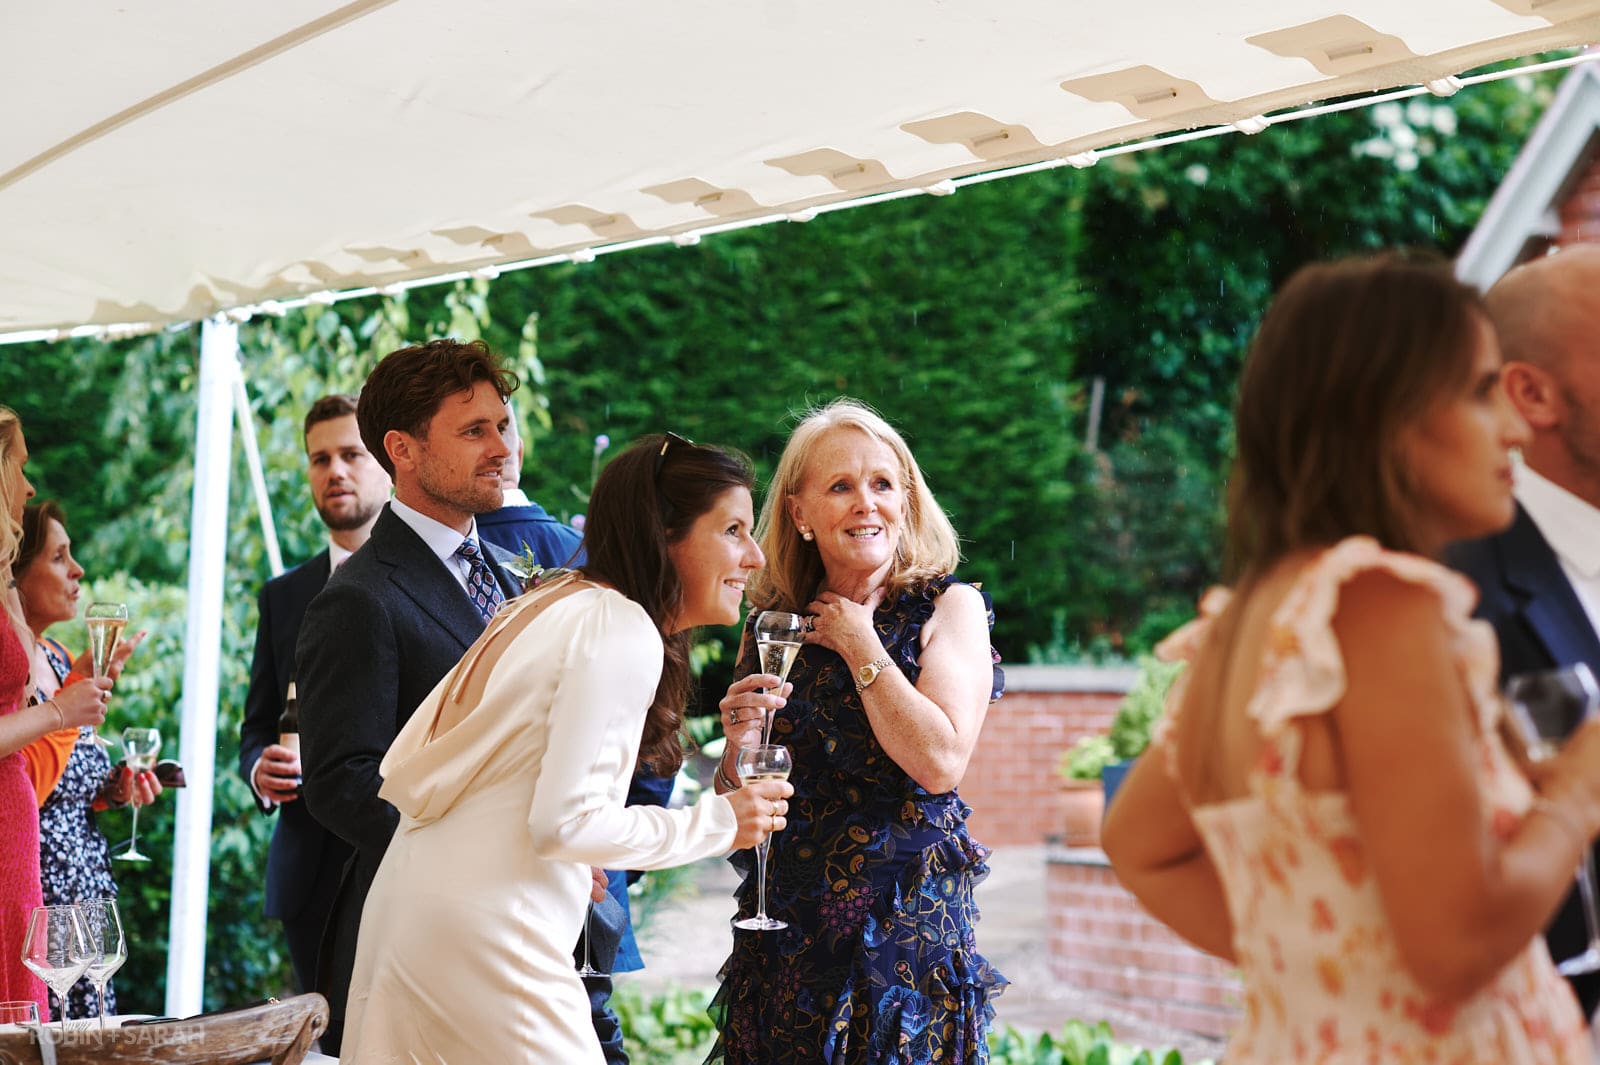 Guests relax and chat at small wedding reception